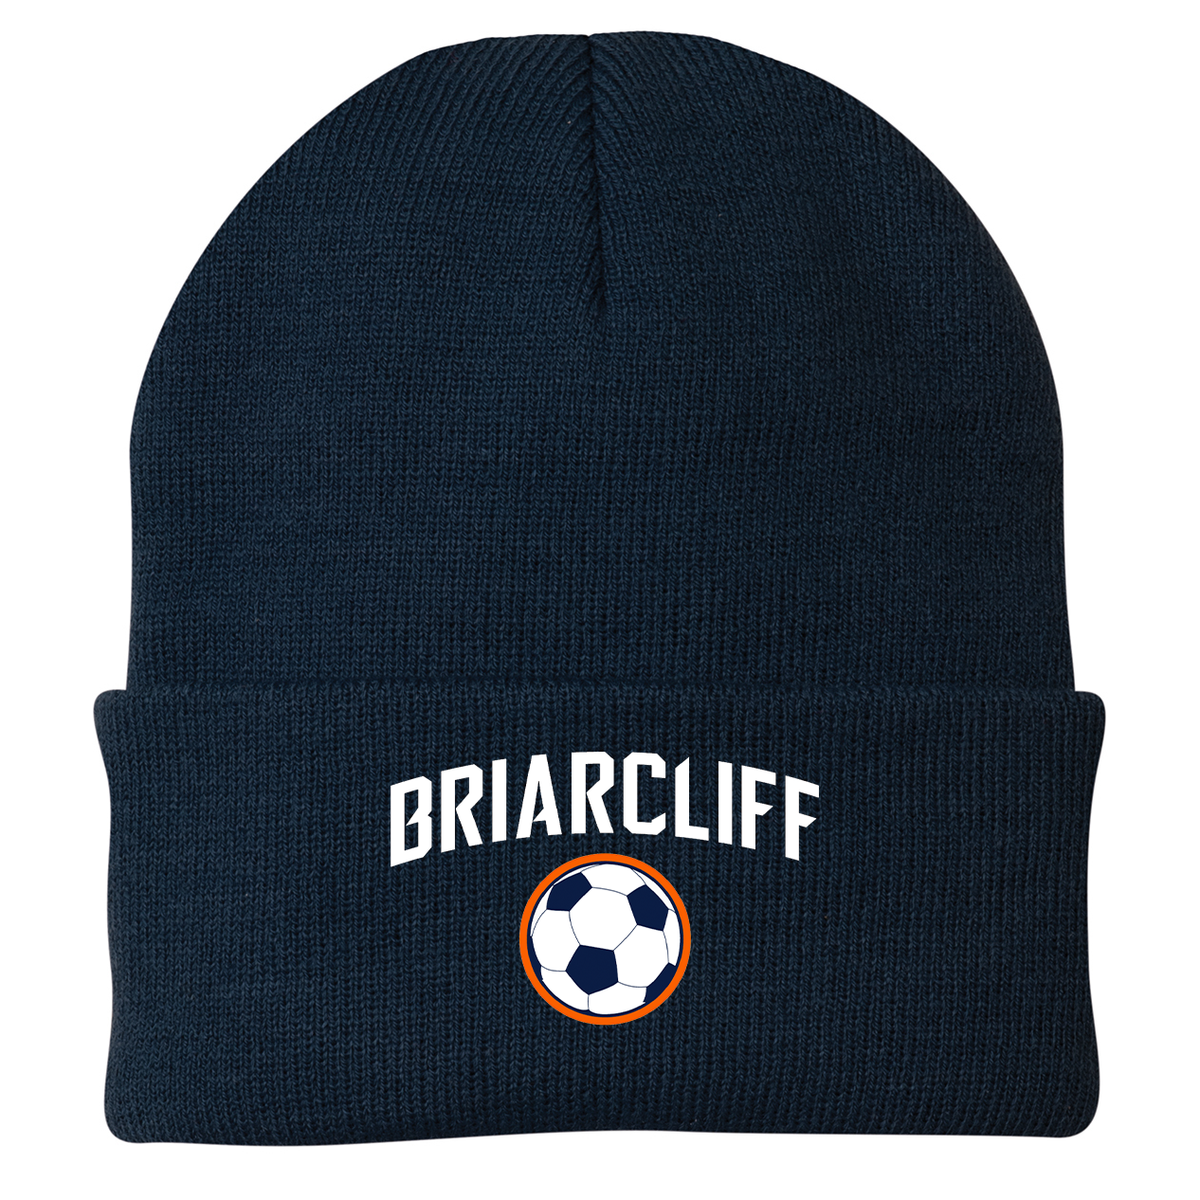 Briarcliff Soccer Knit Beanie